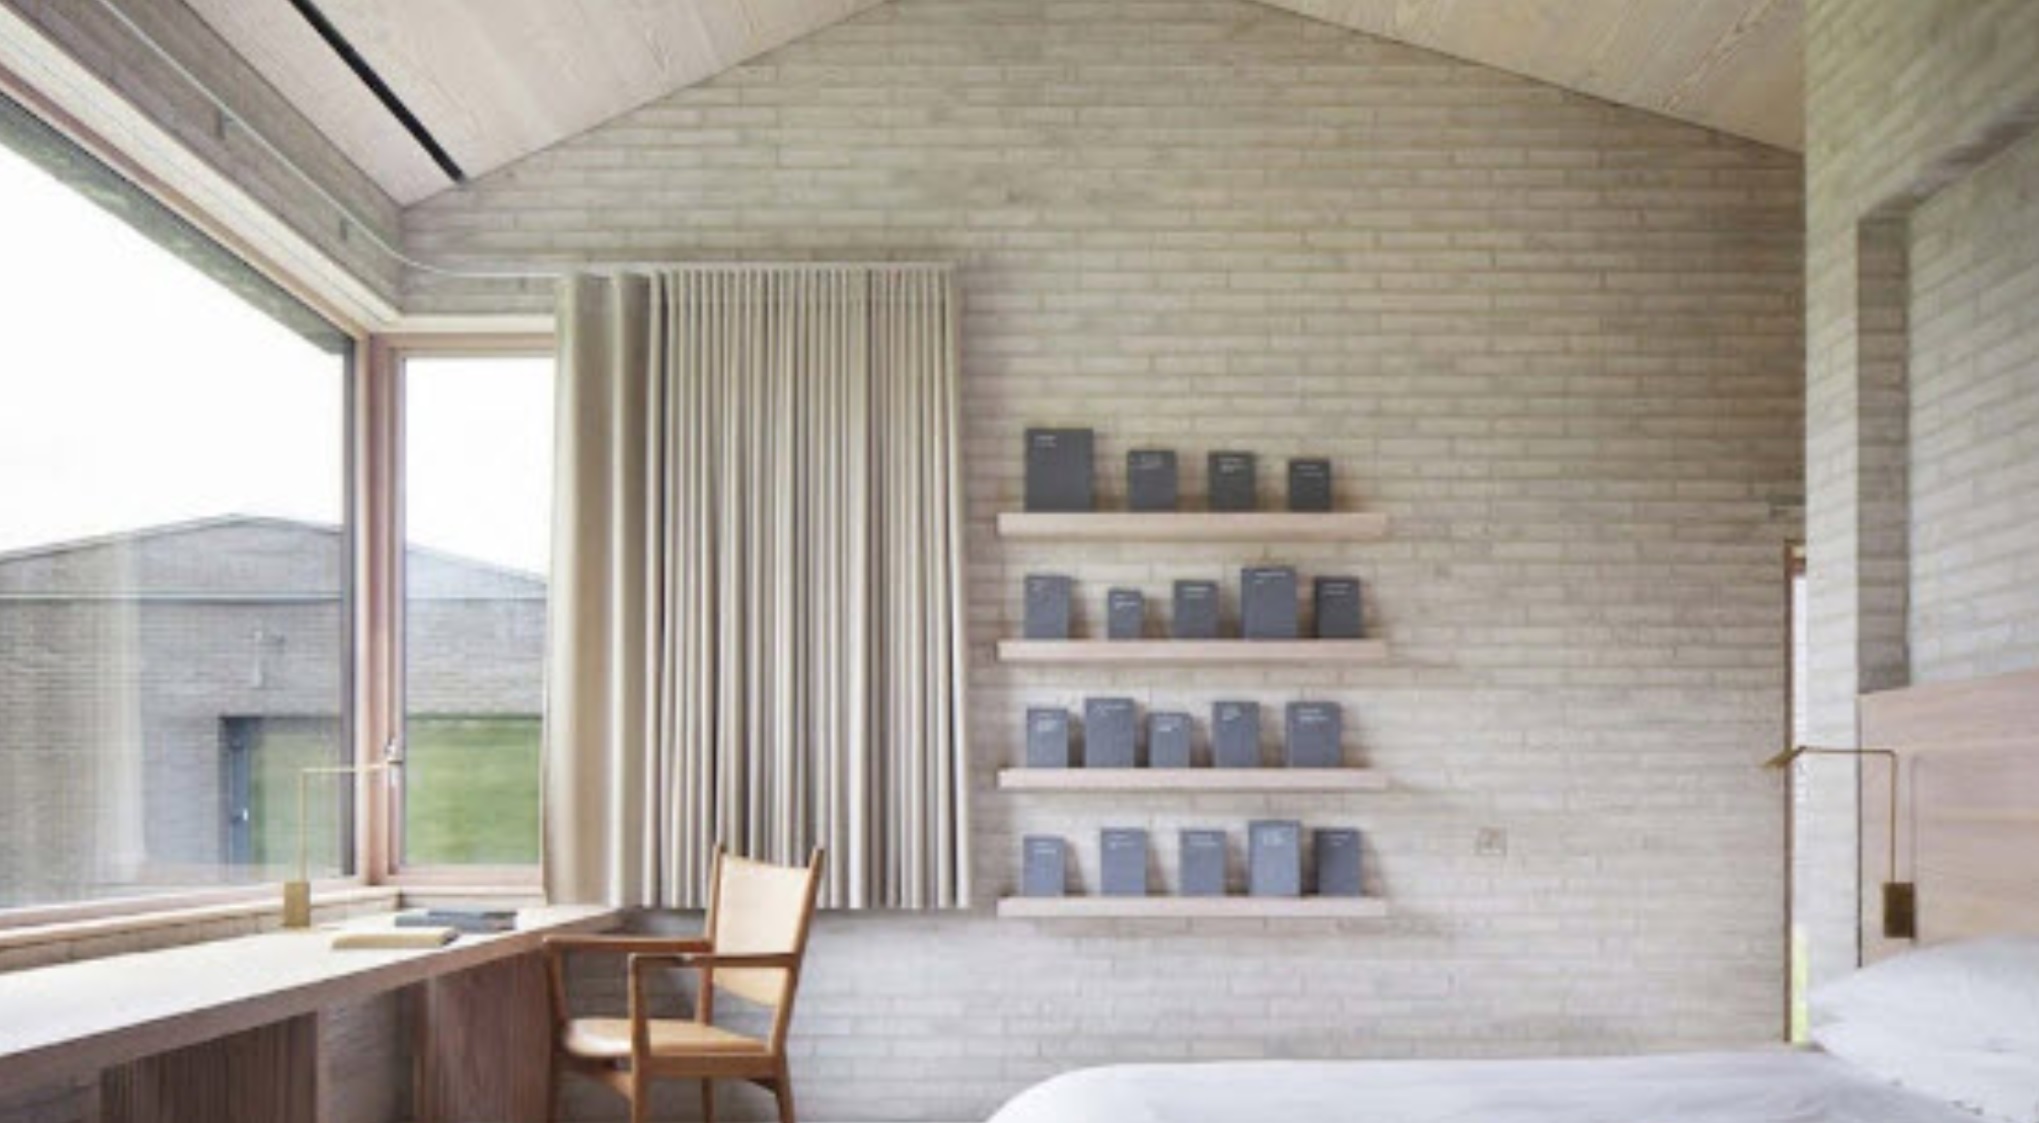 Room for a Convalescent: The Life House, Wales, John Pawson, 2016. 